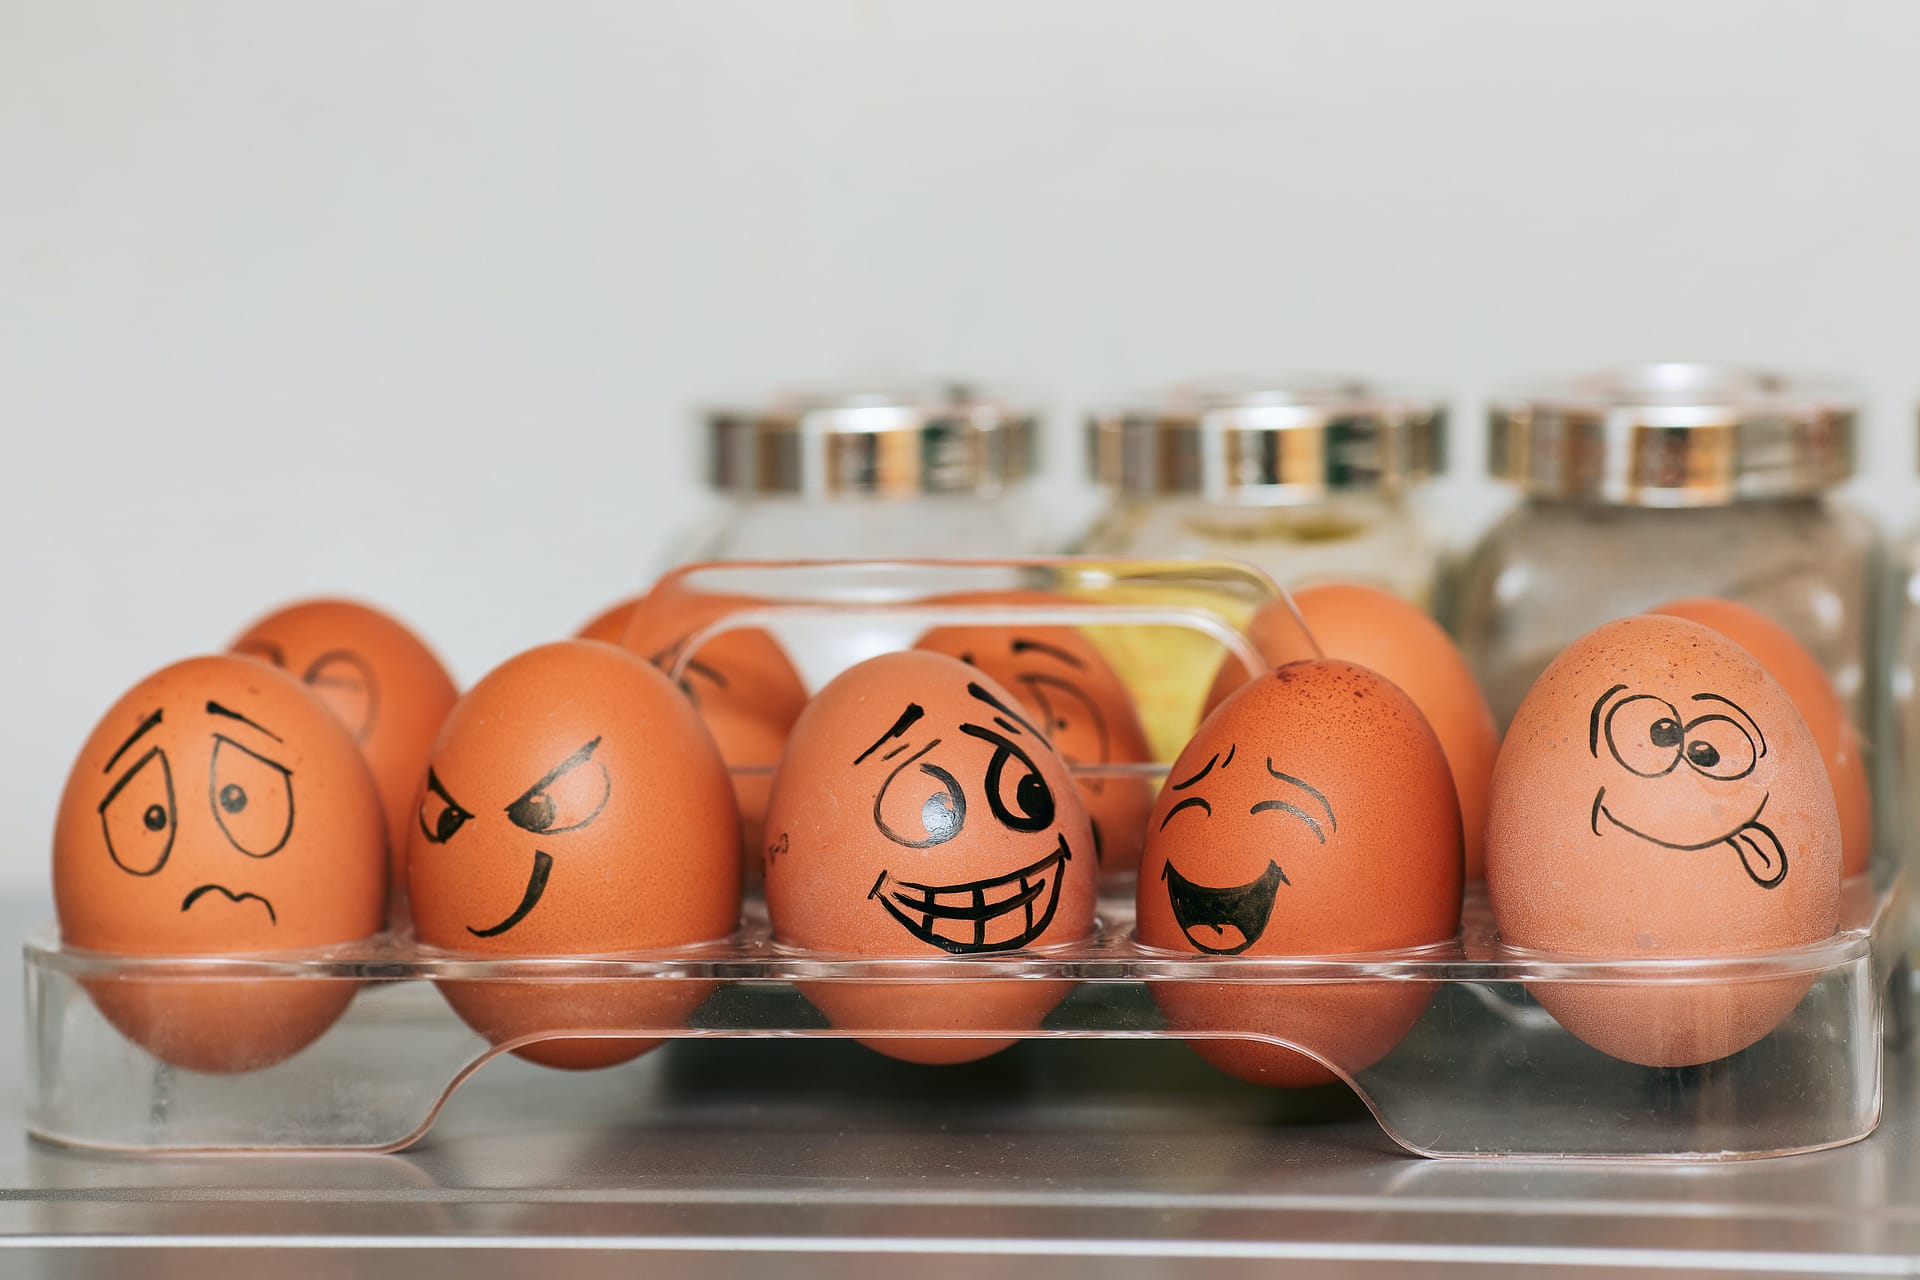 Eggs in a carton with faces drawn on